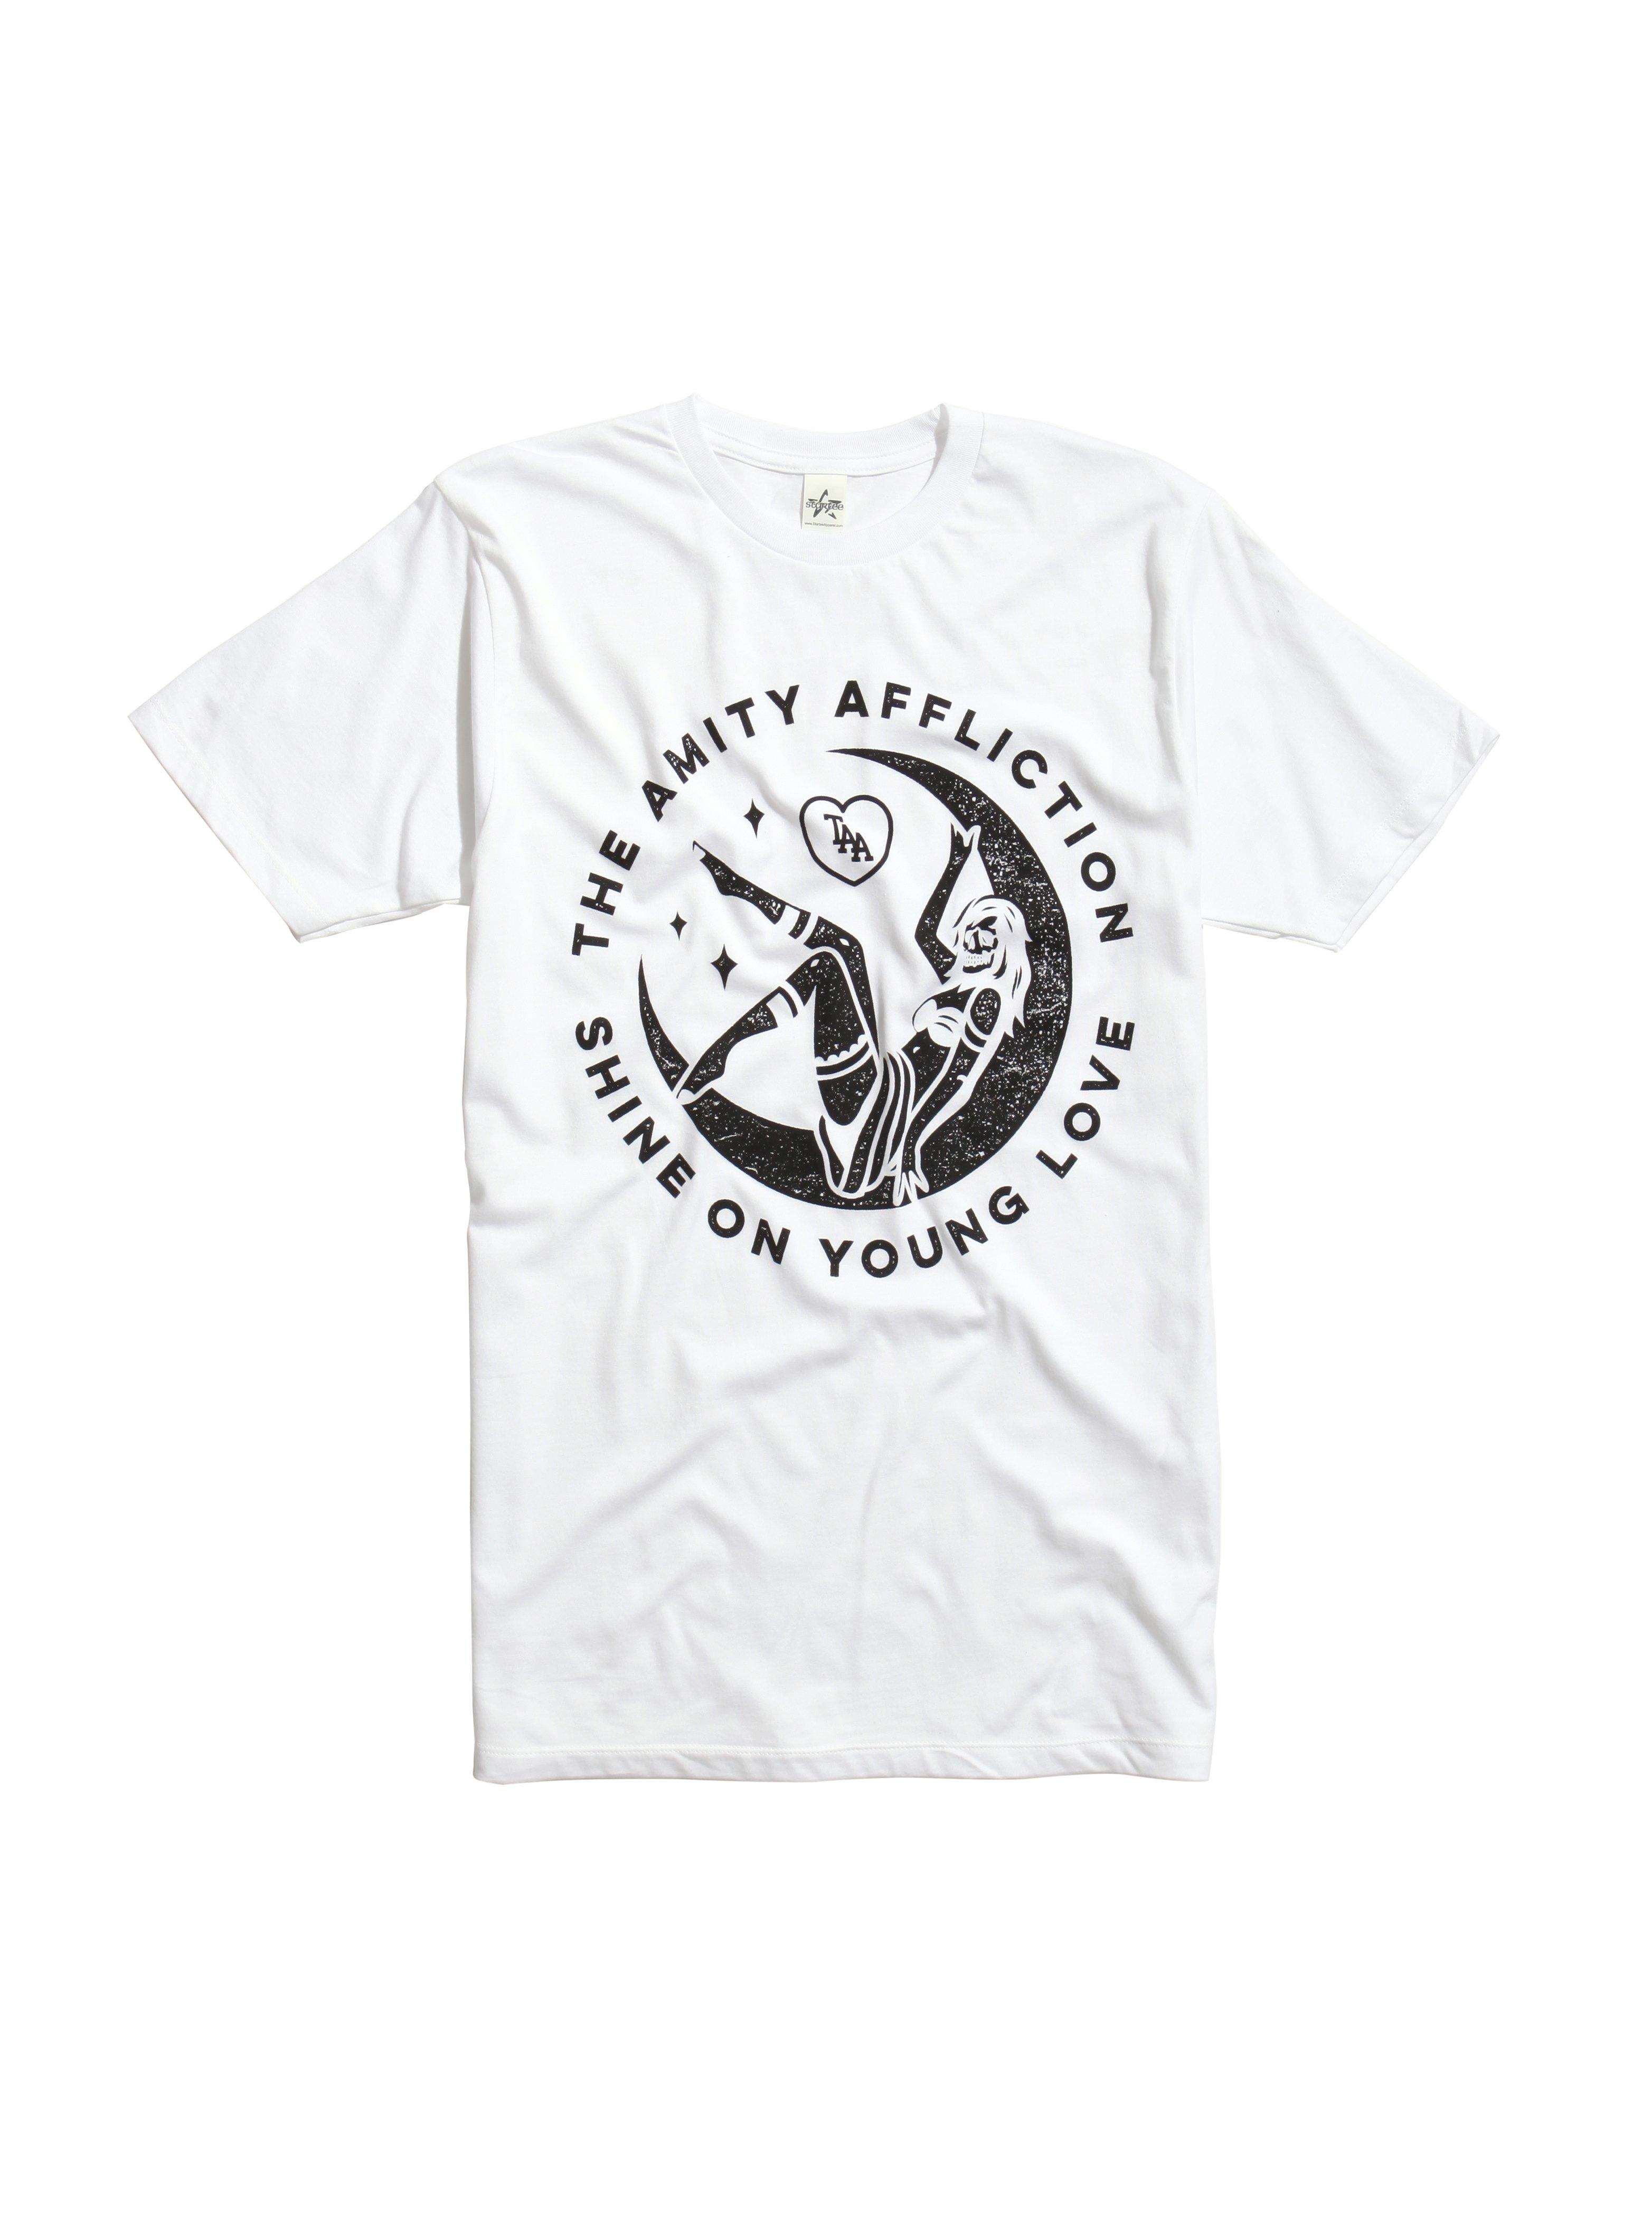 The Amity Affliction Shine On T-Shirt | Hot Topic